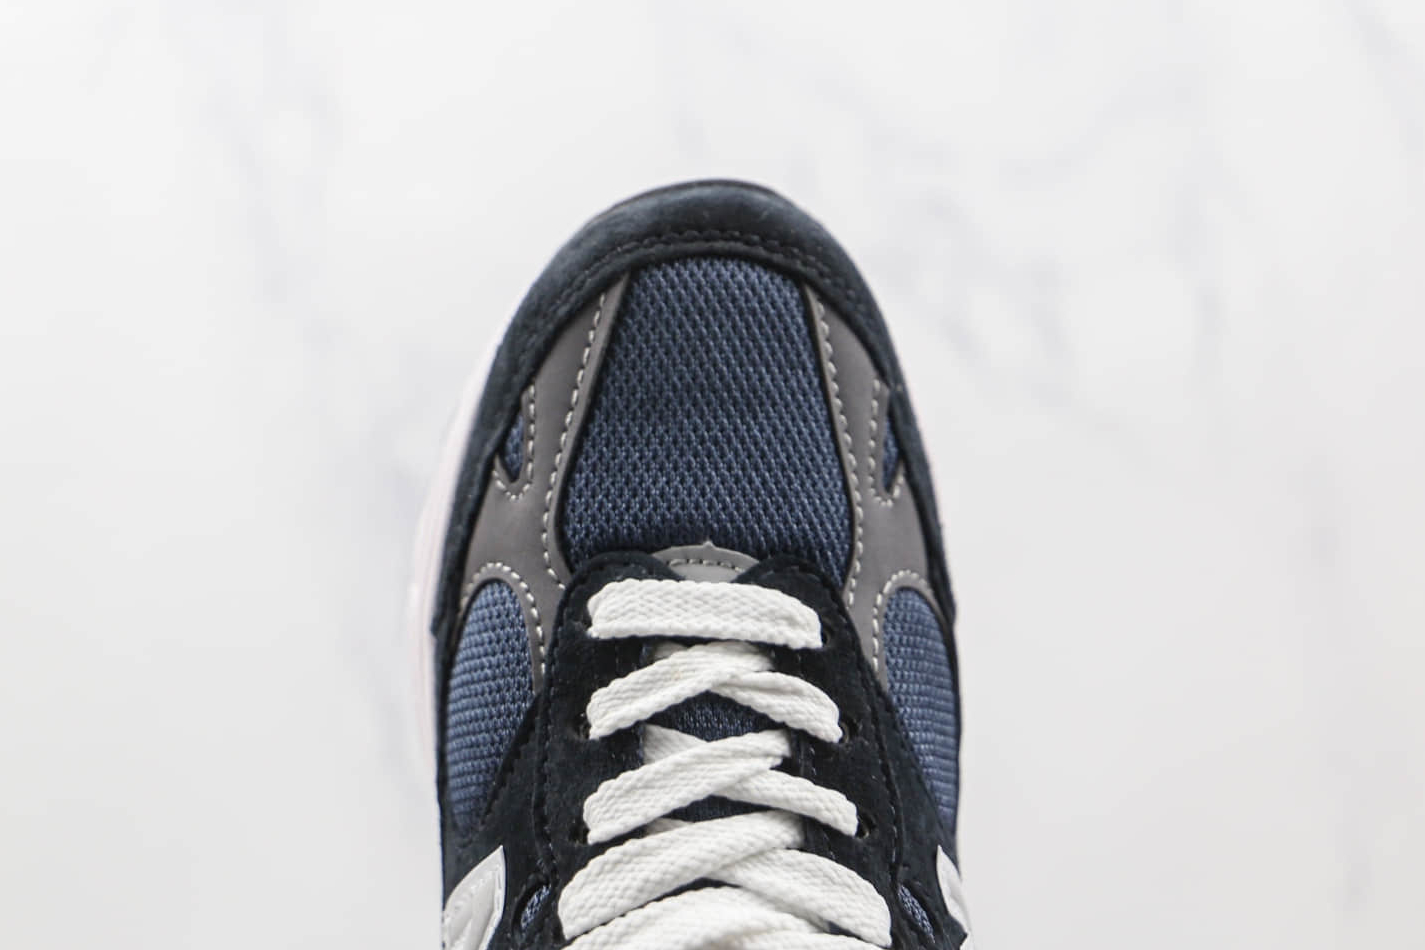 New Balance 993 'Navy White' MR993NV - Premium Athletic Shoes & Cushioned Support